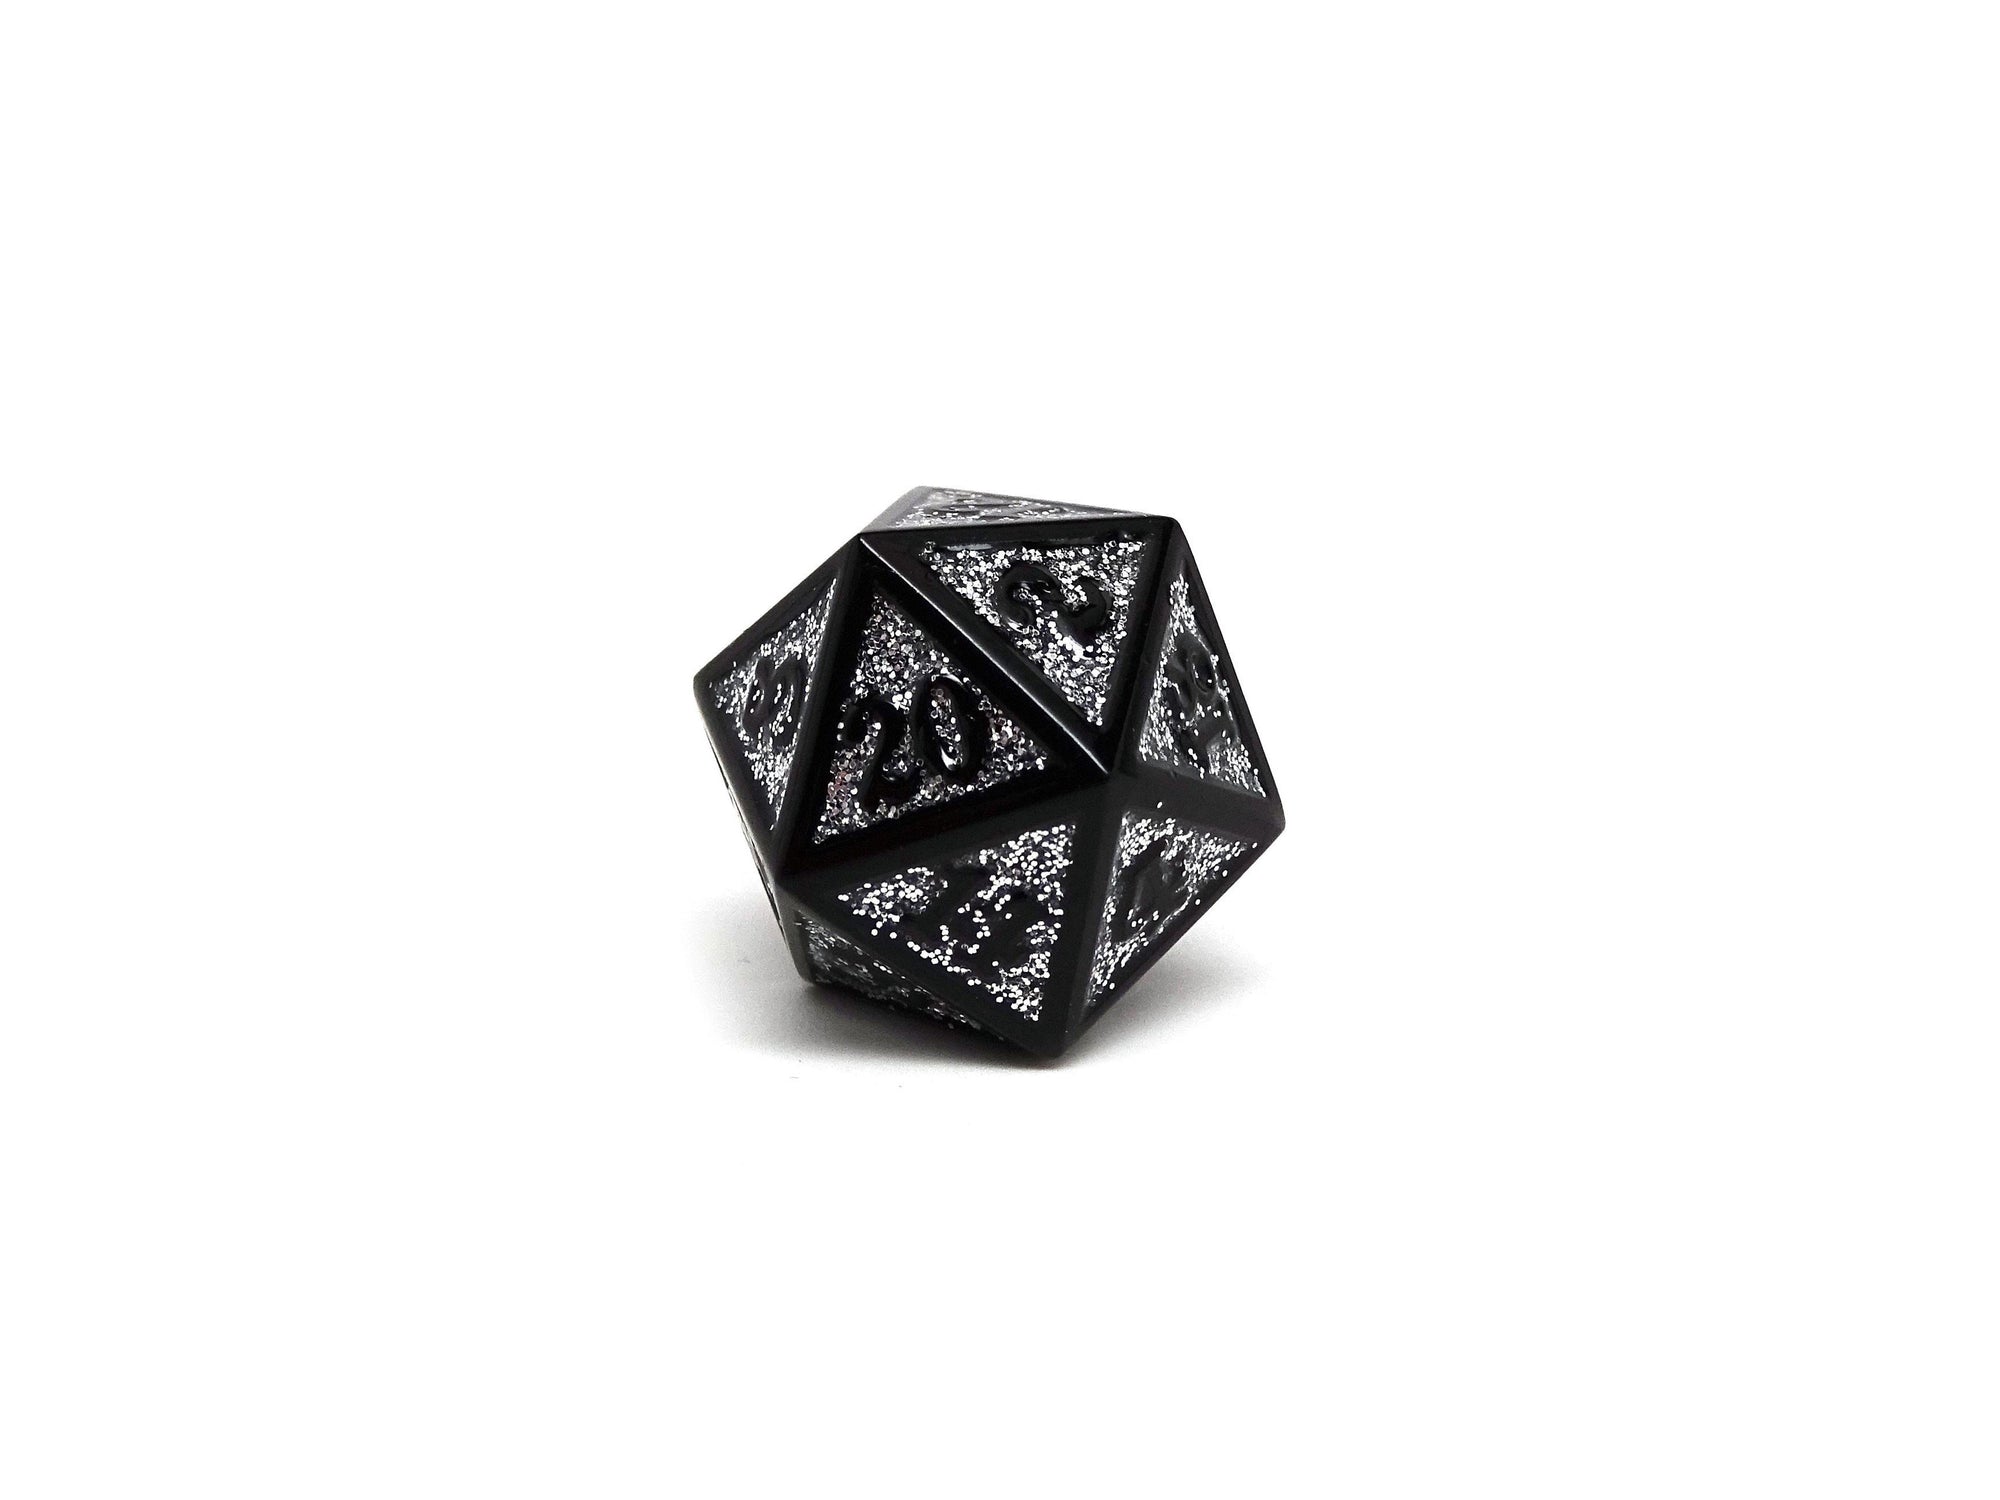  Endless Honor Dice (Silver) D20 Dice with Celtic Knots